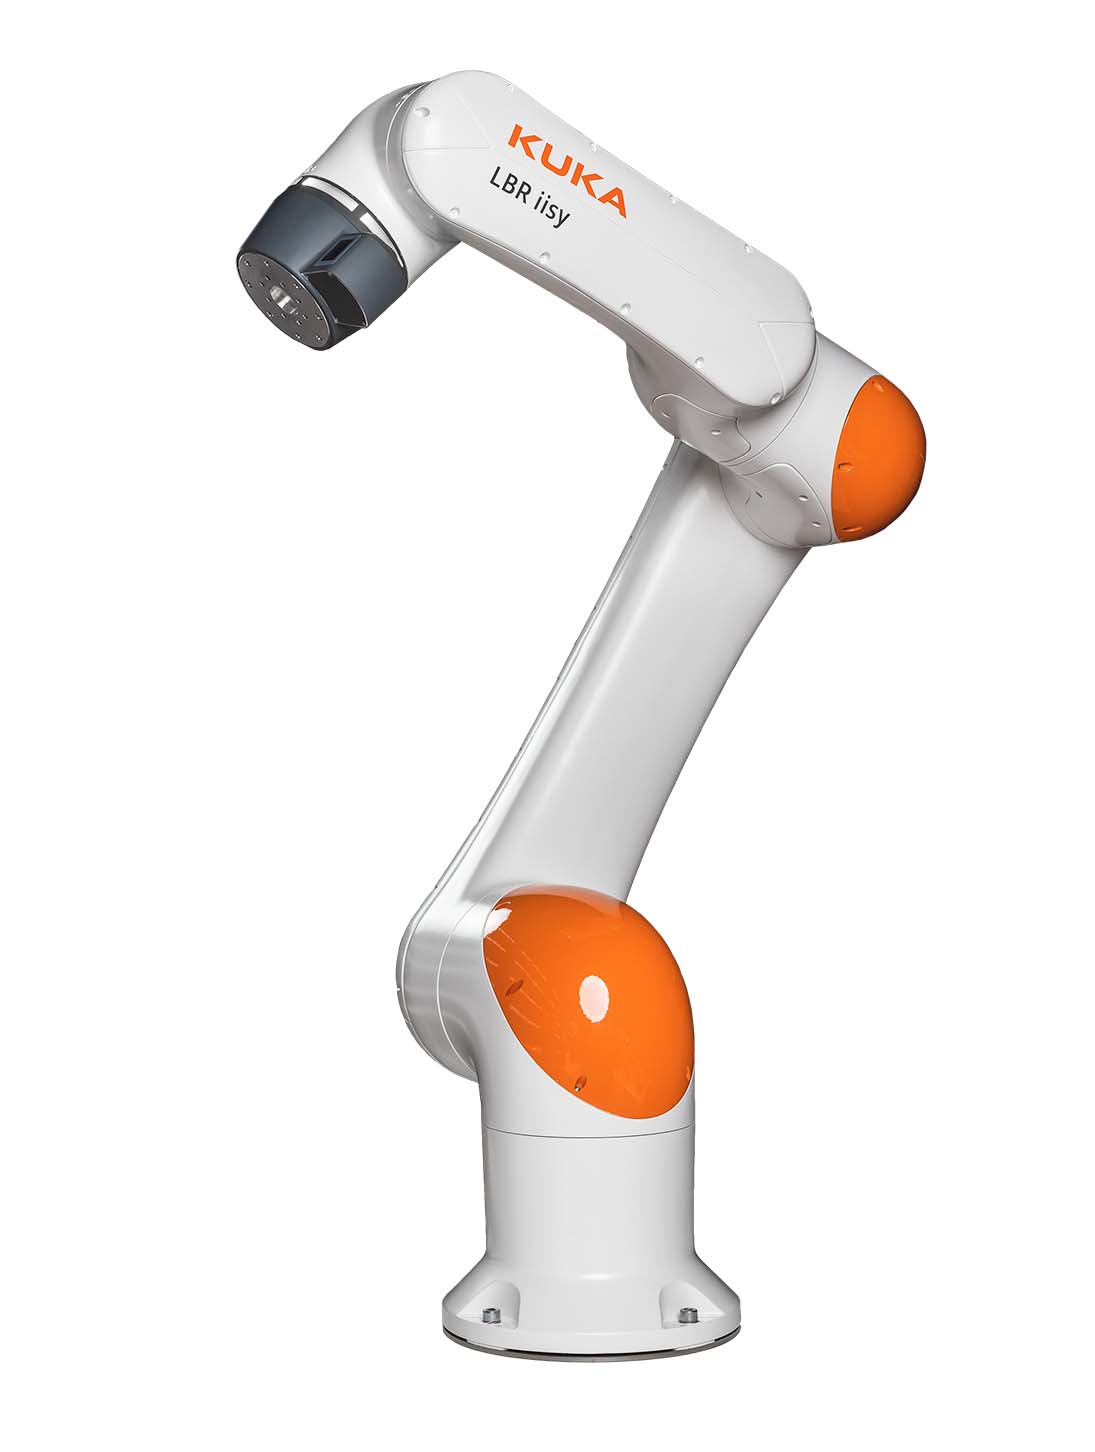 The Kuka LBR iisy 11 cobot can be connected to a Robatech adhesive application system via the integration kit.